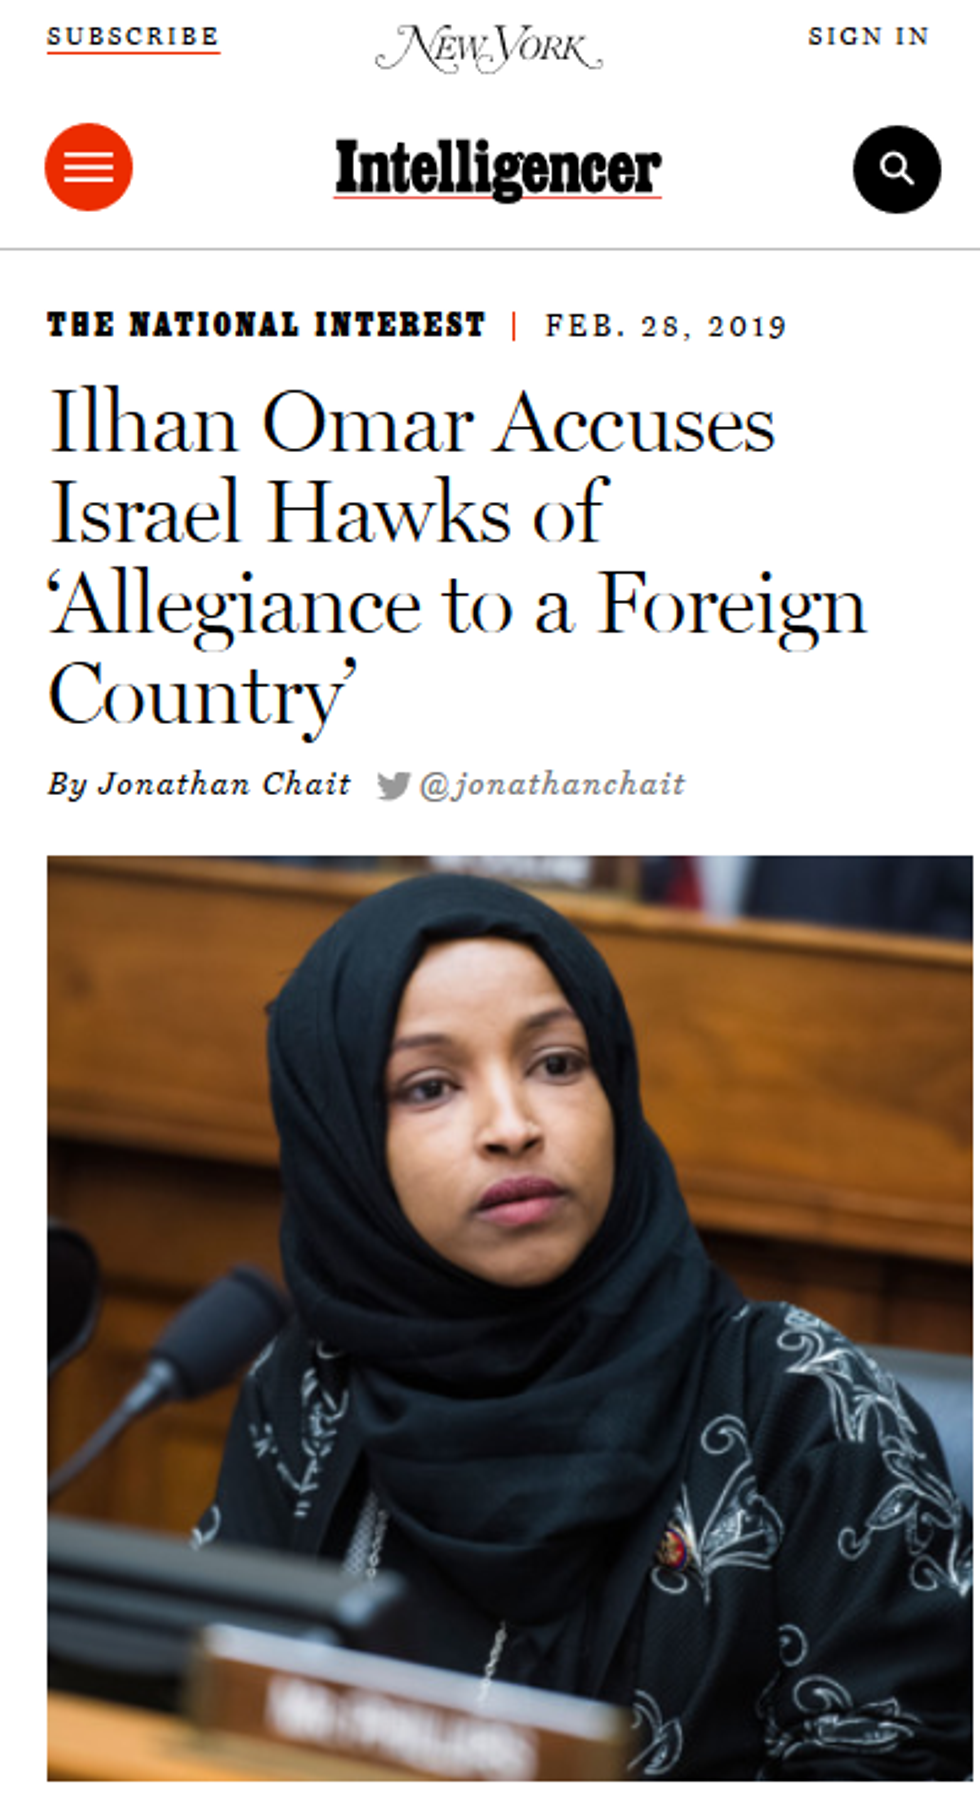 New York: Ilhan Omar Accuses Israel Hawks of 'Allegiance to a Foreign Country'